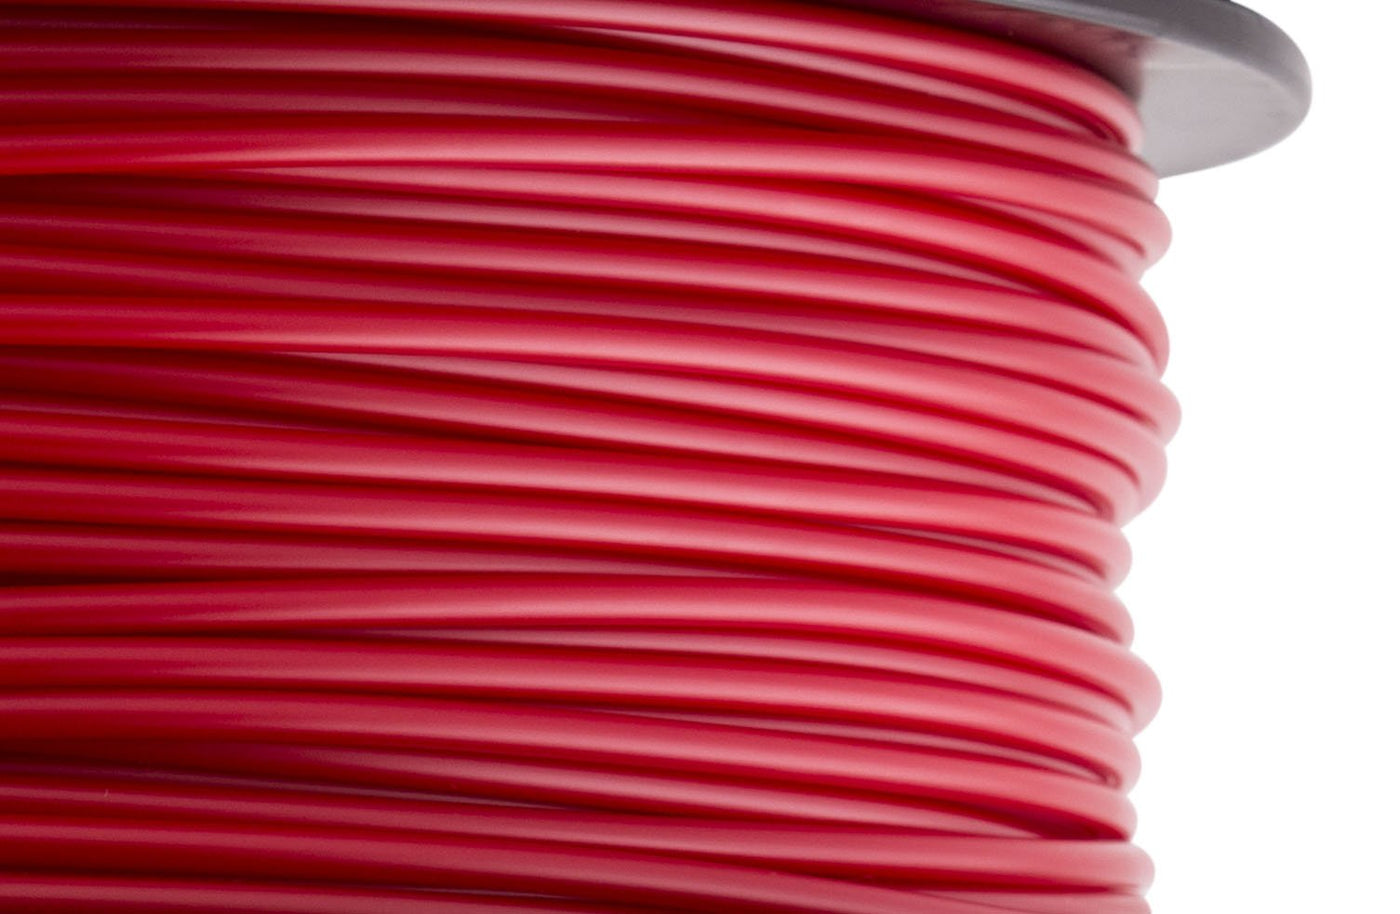 RED ABS FILAMENT - 3.00MM, 1KG SPOOL